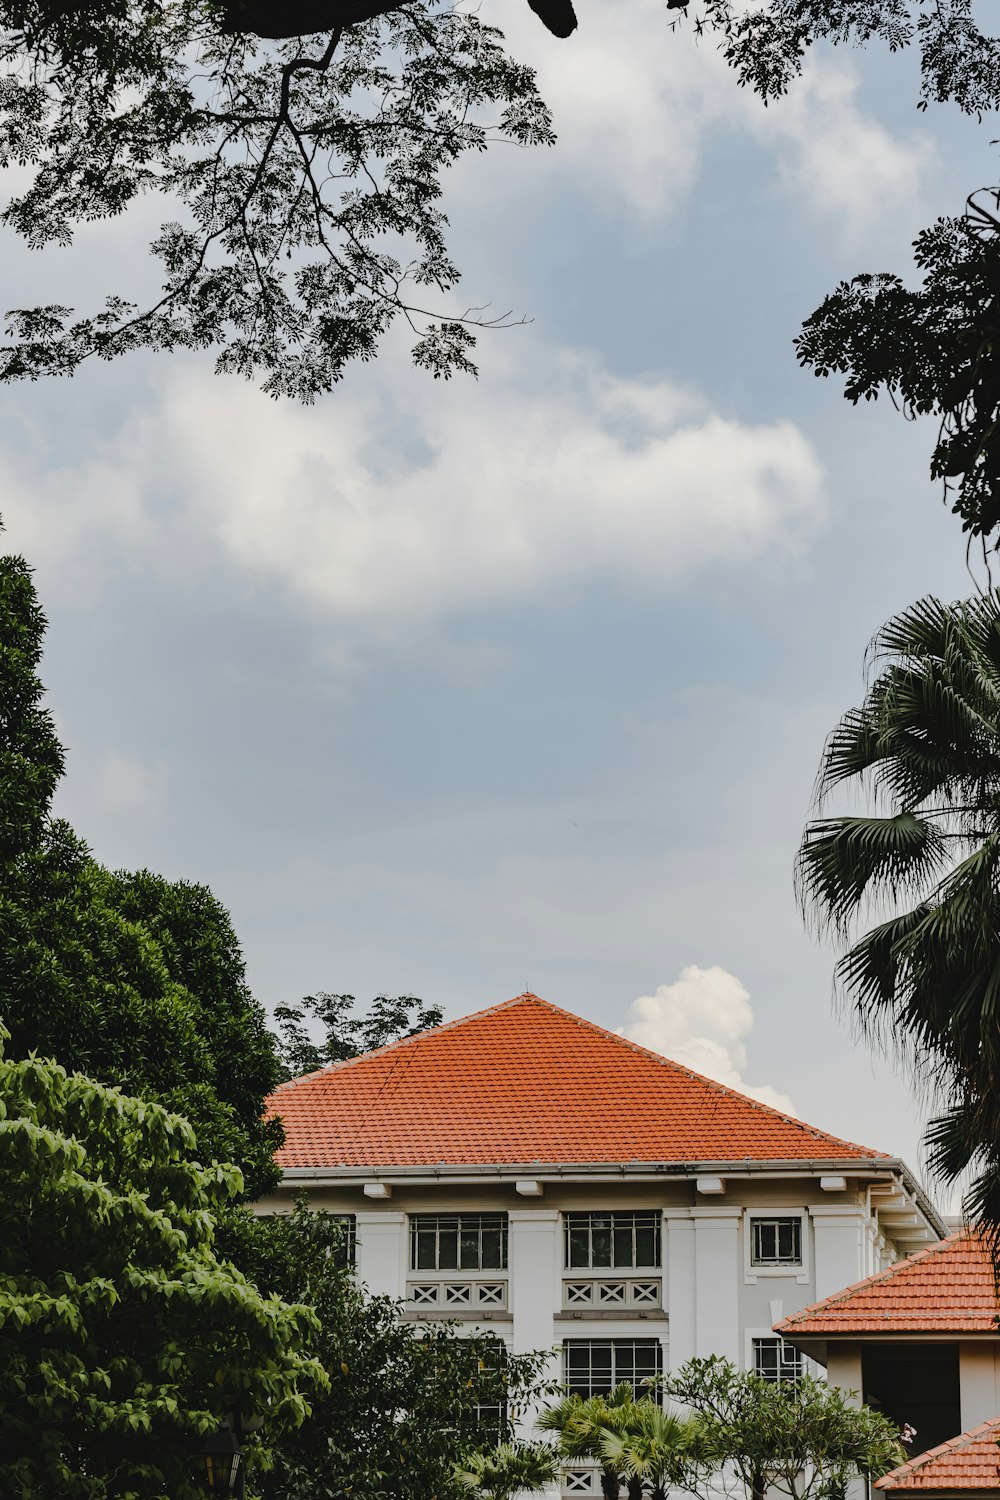 a tall white building with a red roof